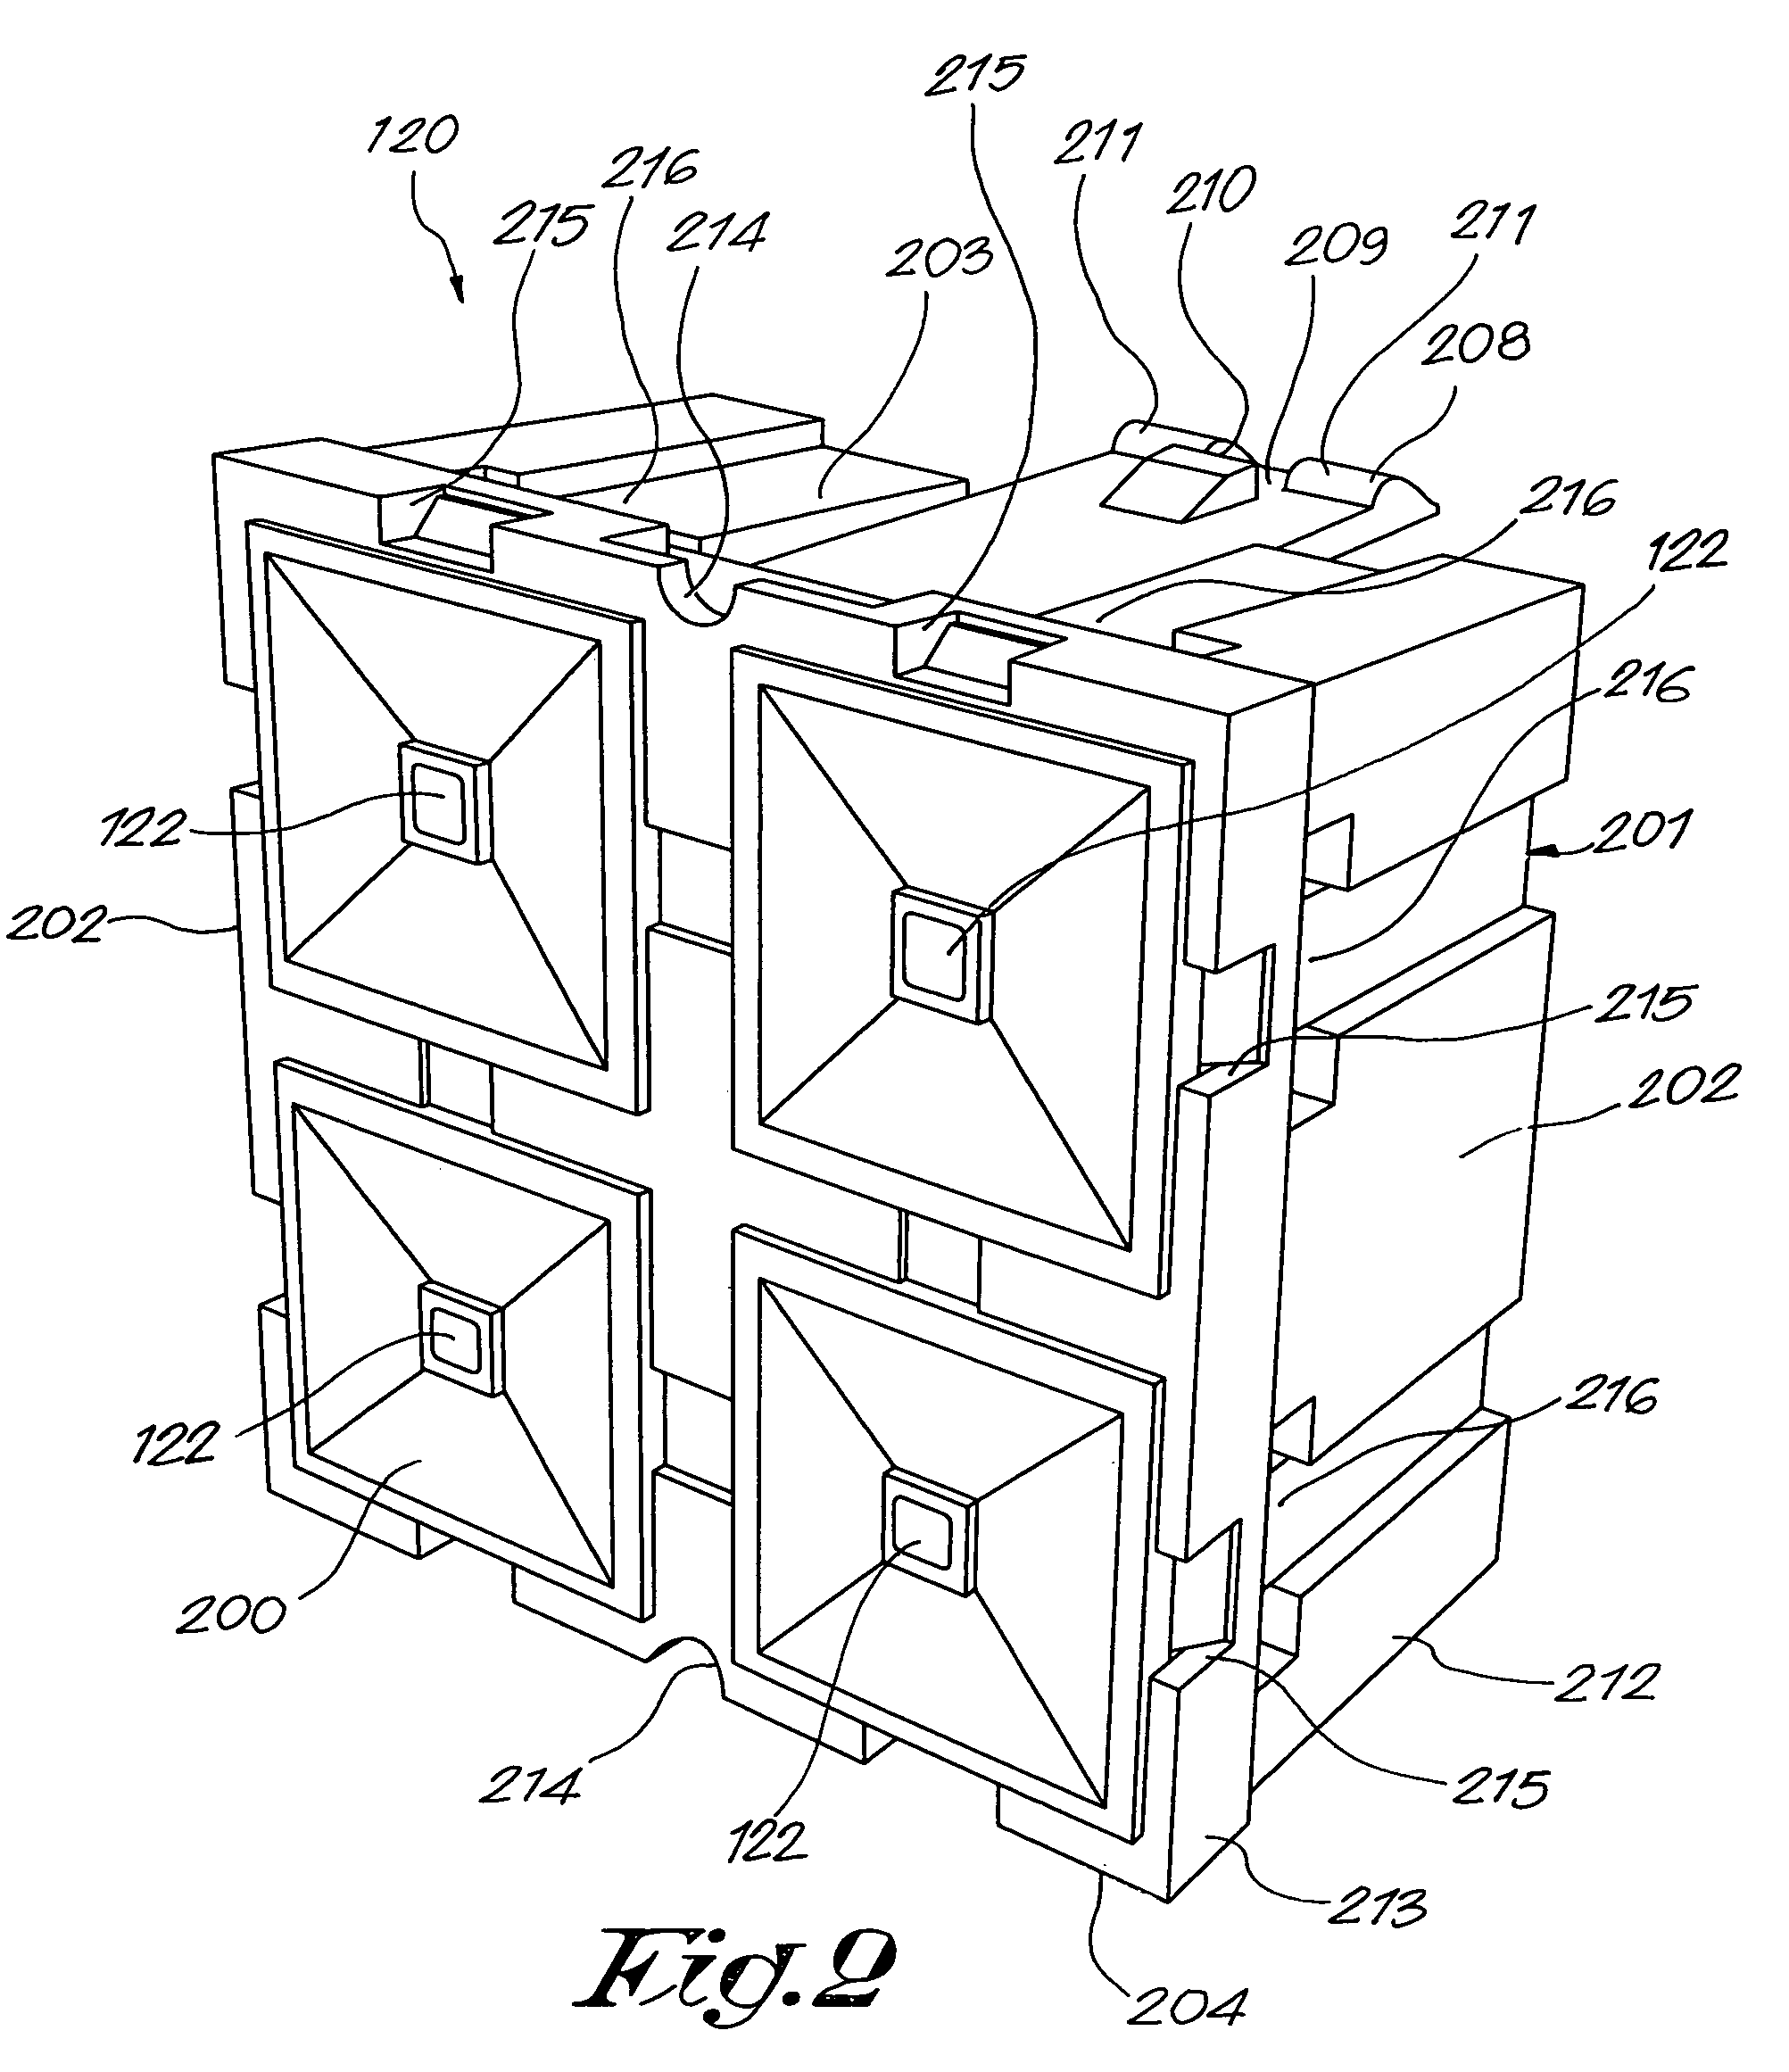 Display pixel module for use in a configurable large-screen display application and display with such pixel modules